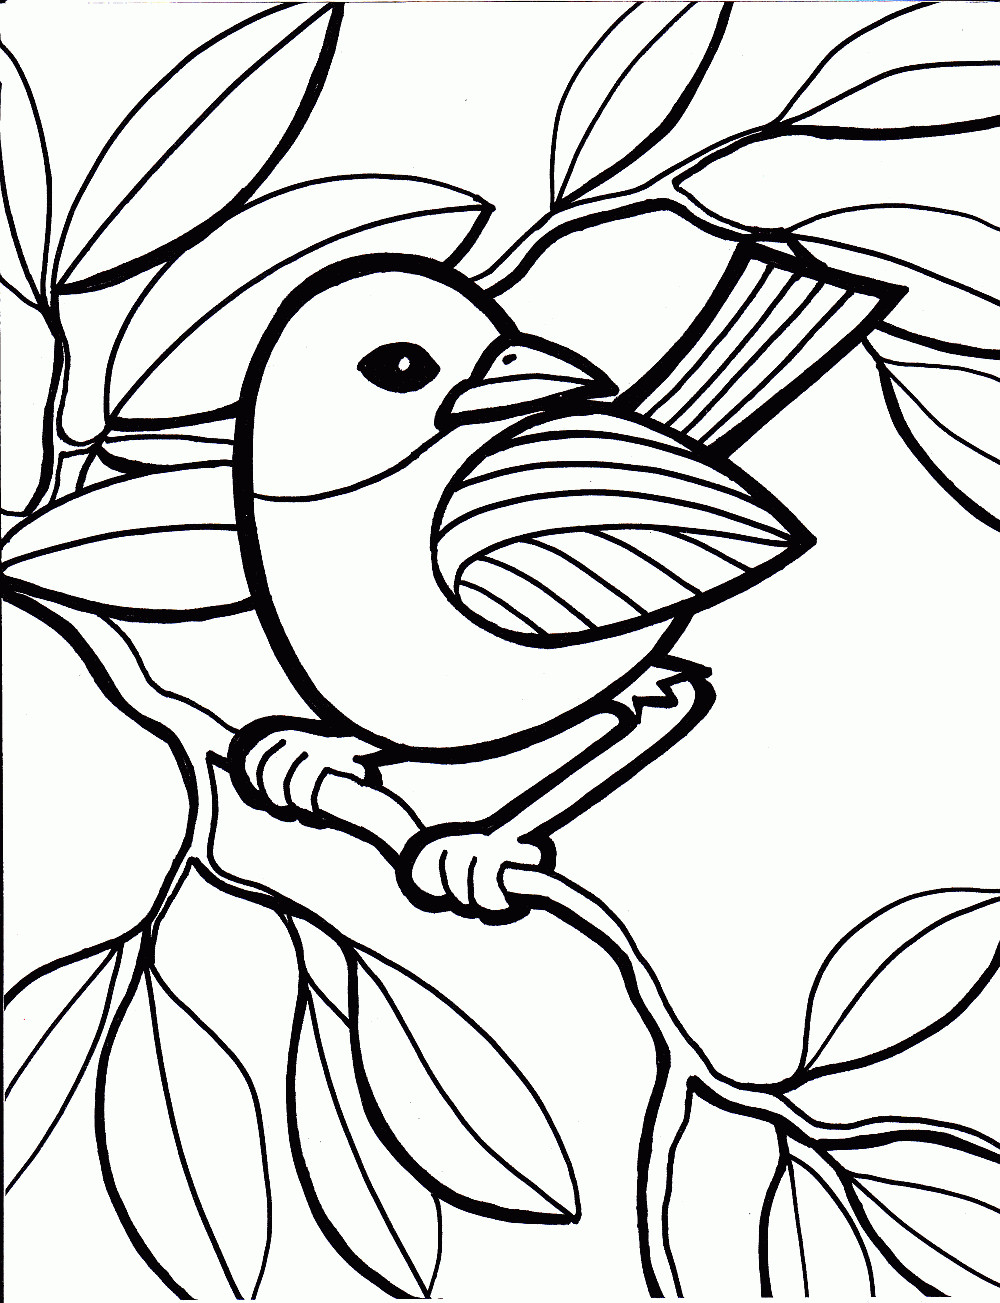 Free Coloring Sheets For Kids
 Free Coloring Pages For Kids Top Profile